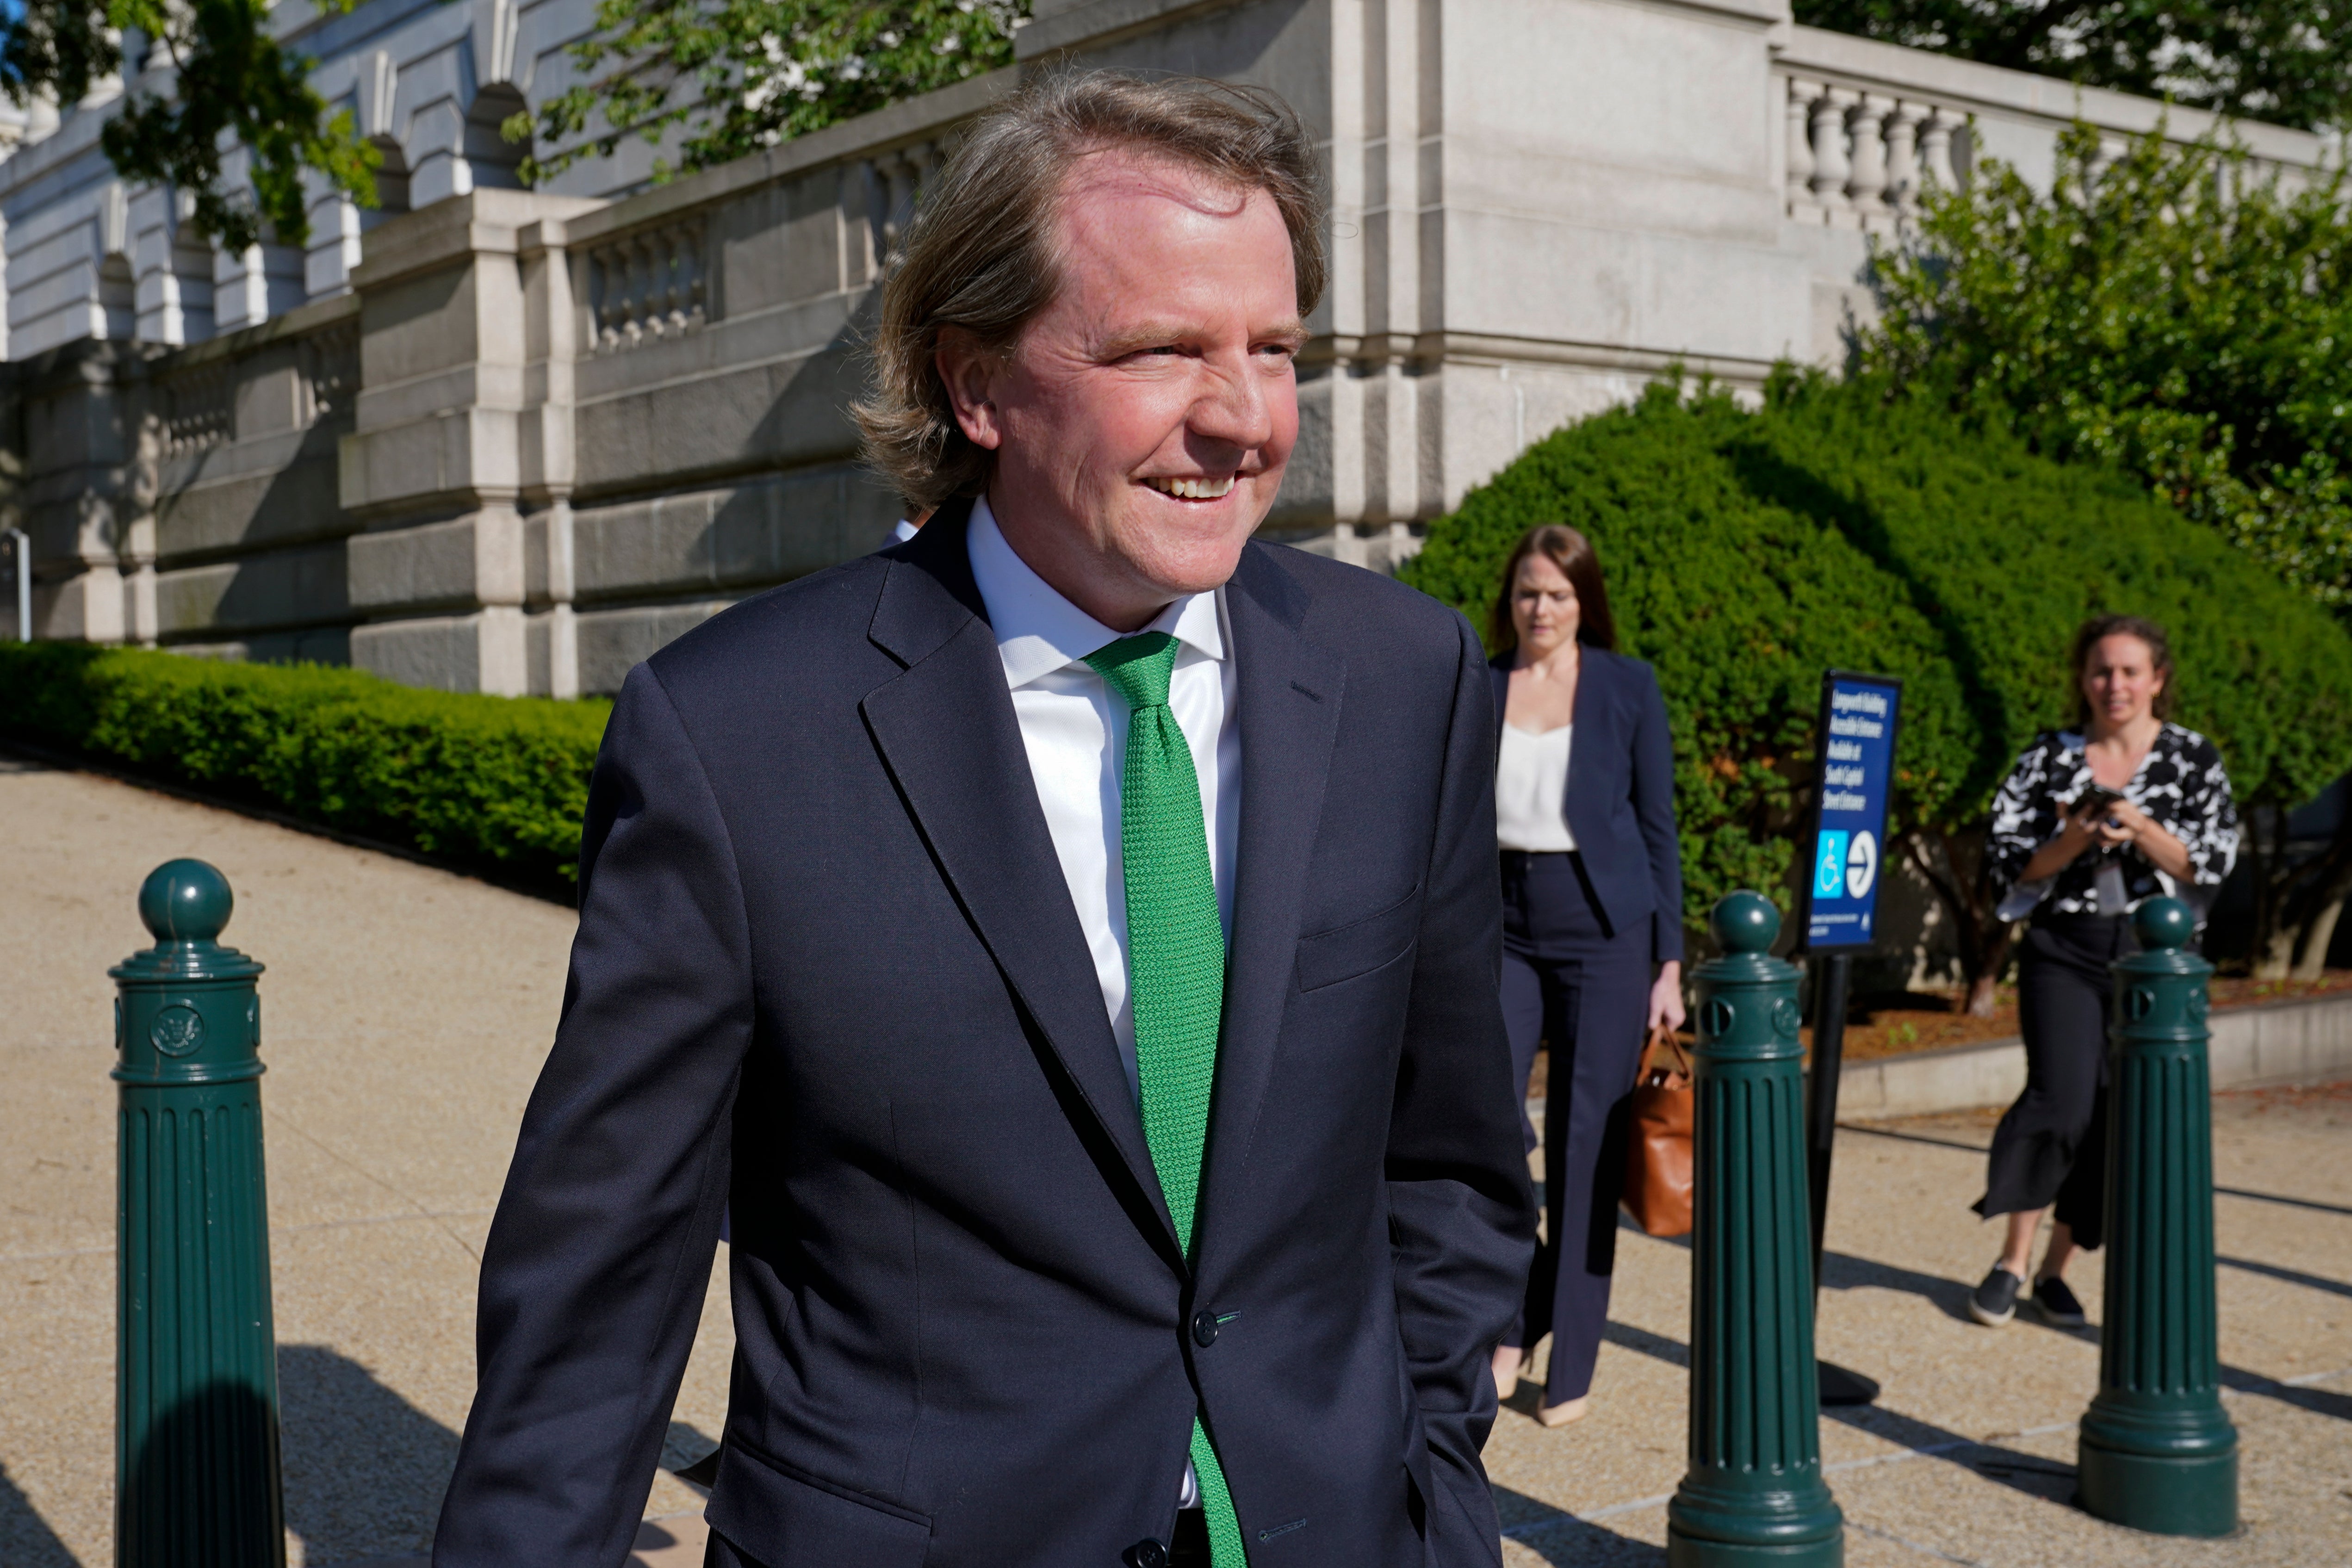 Former White House counsel Don McGahn departs after appearing for questioning behind closed doors by the House Judiciary Committee on Capitol Hill in Washington, Friday, June 4, 2021